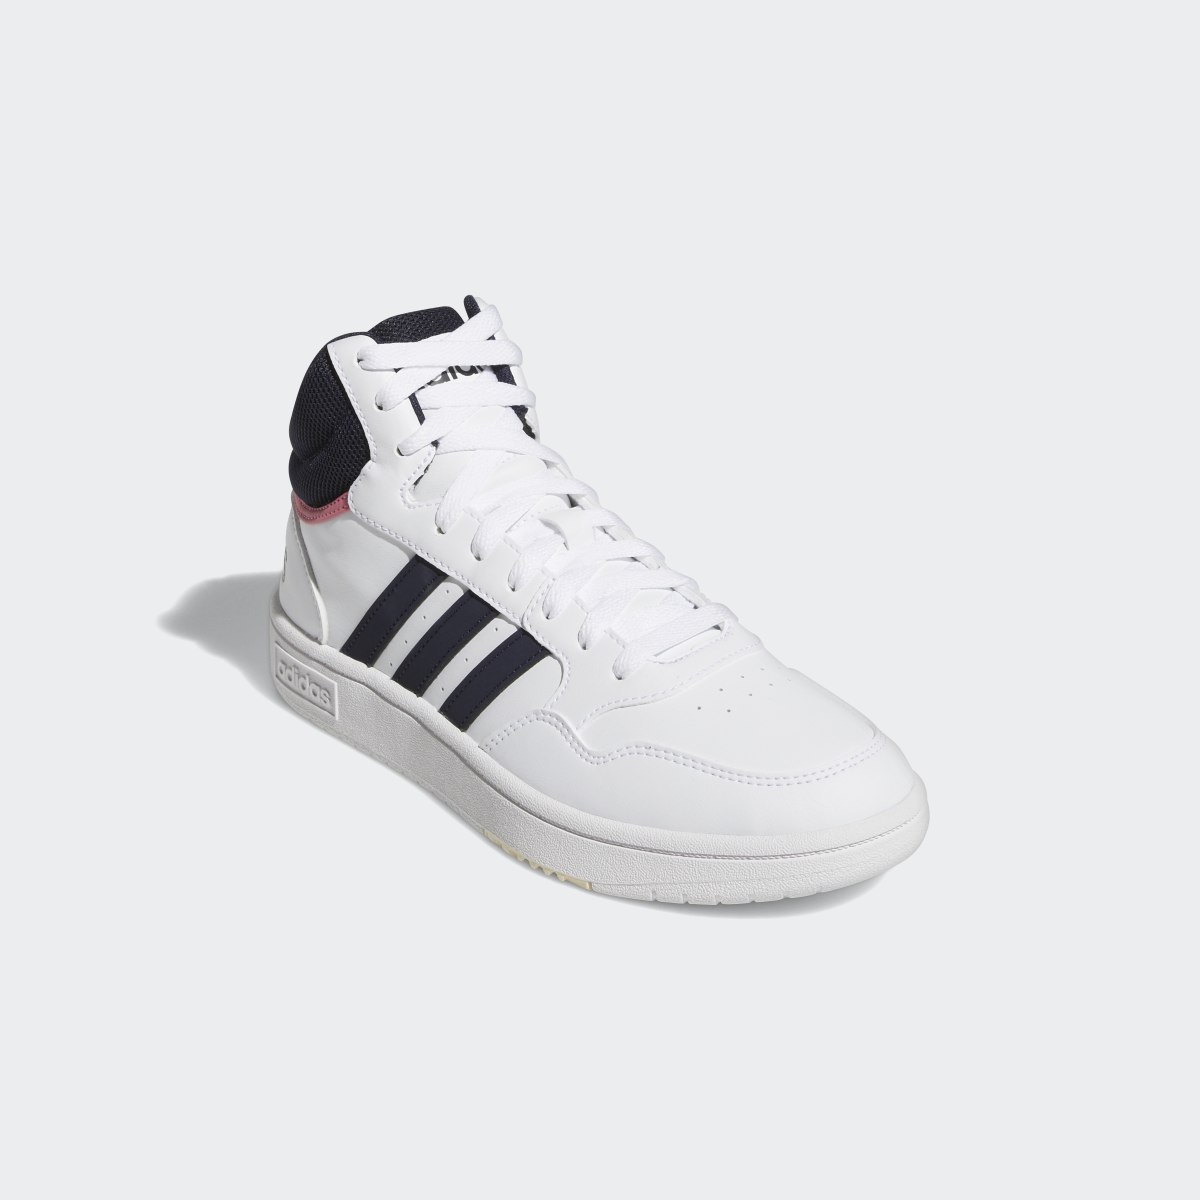 Adidas Hoops 3.0 Mid Classic Shoes. 5